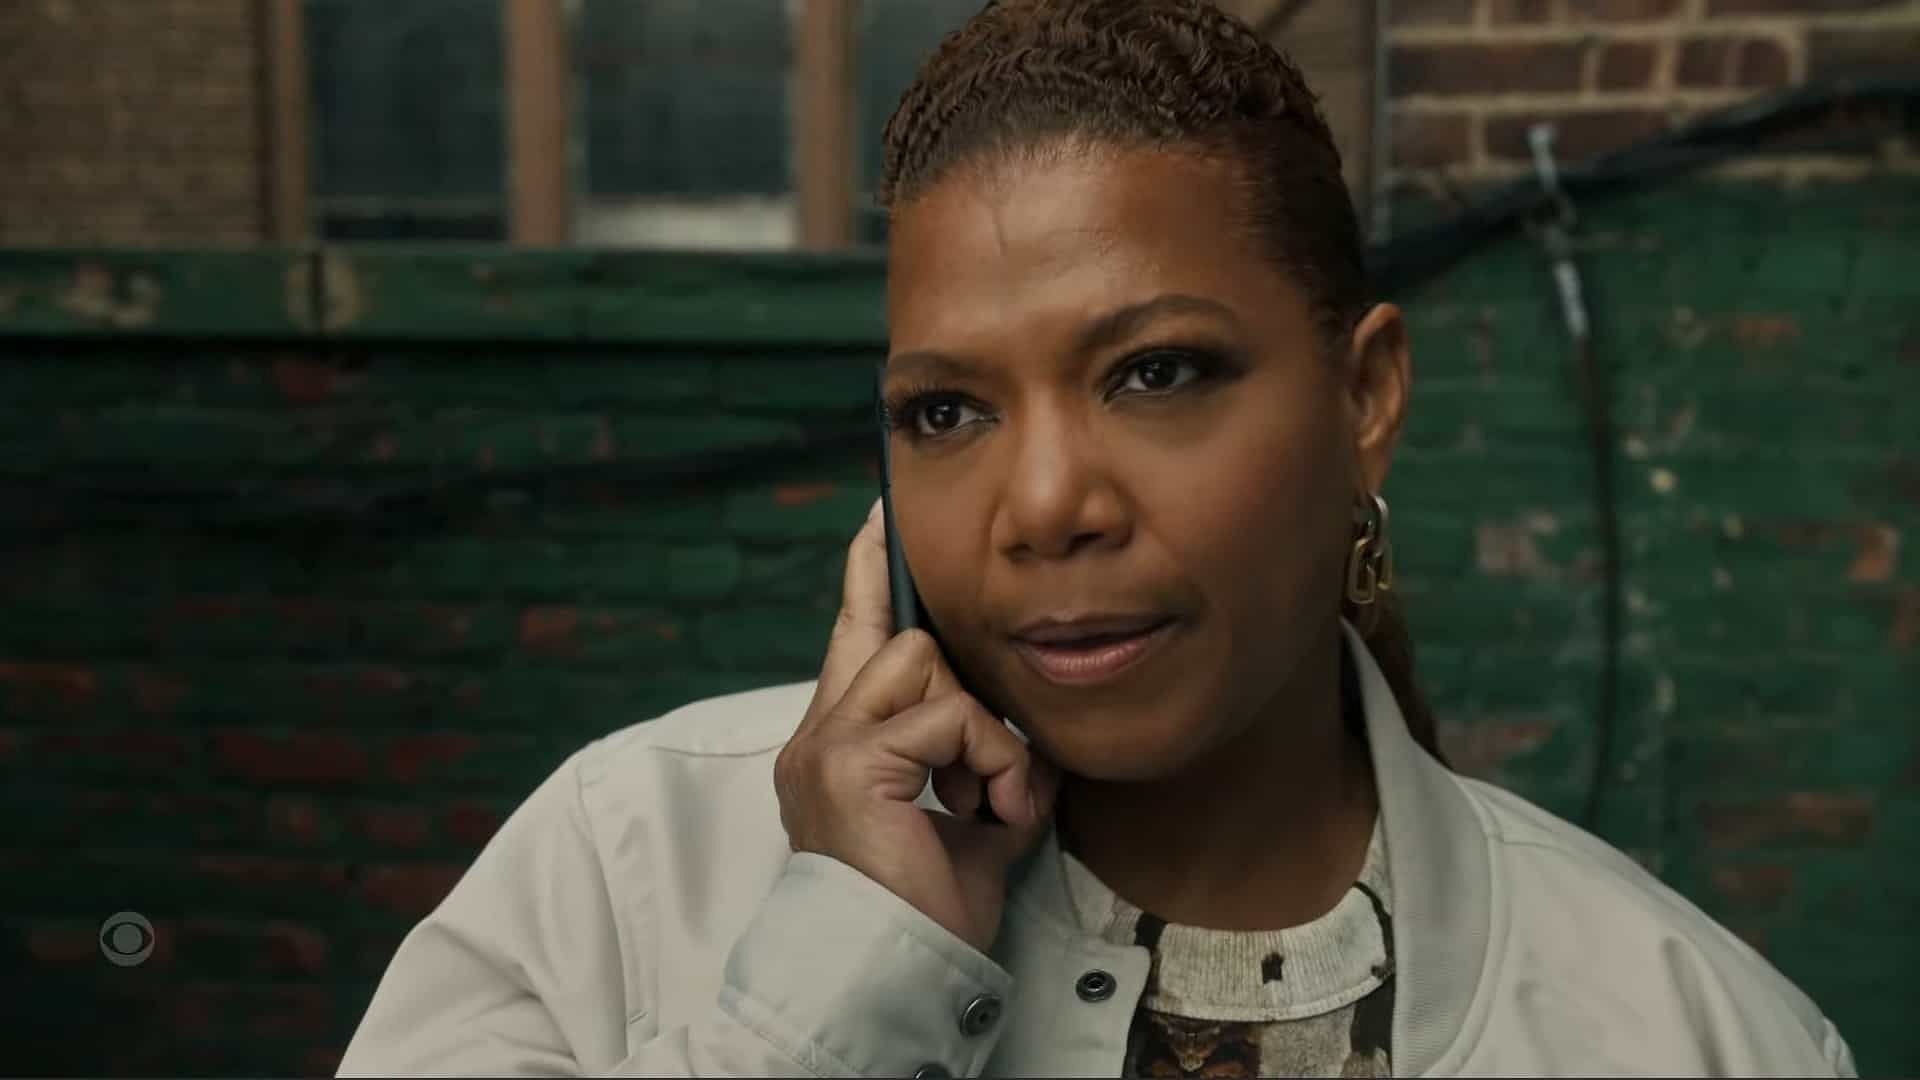 Queen Latifah in The Equalizer (Image via CBS)